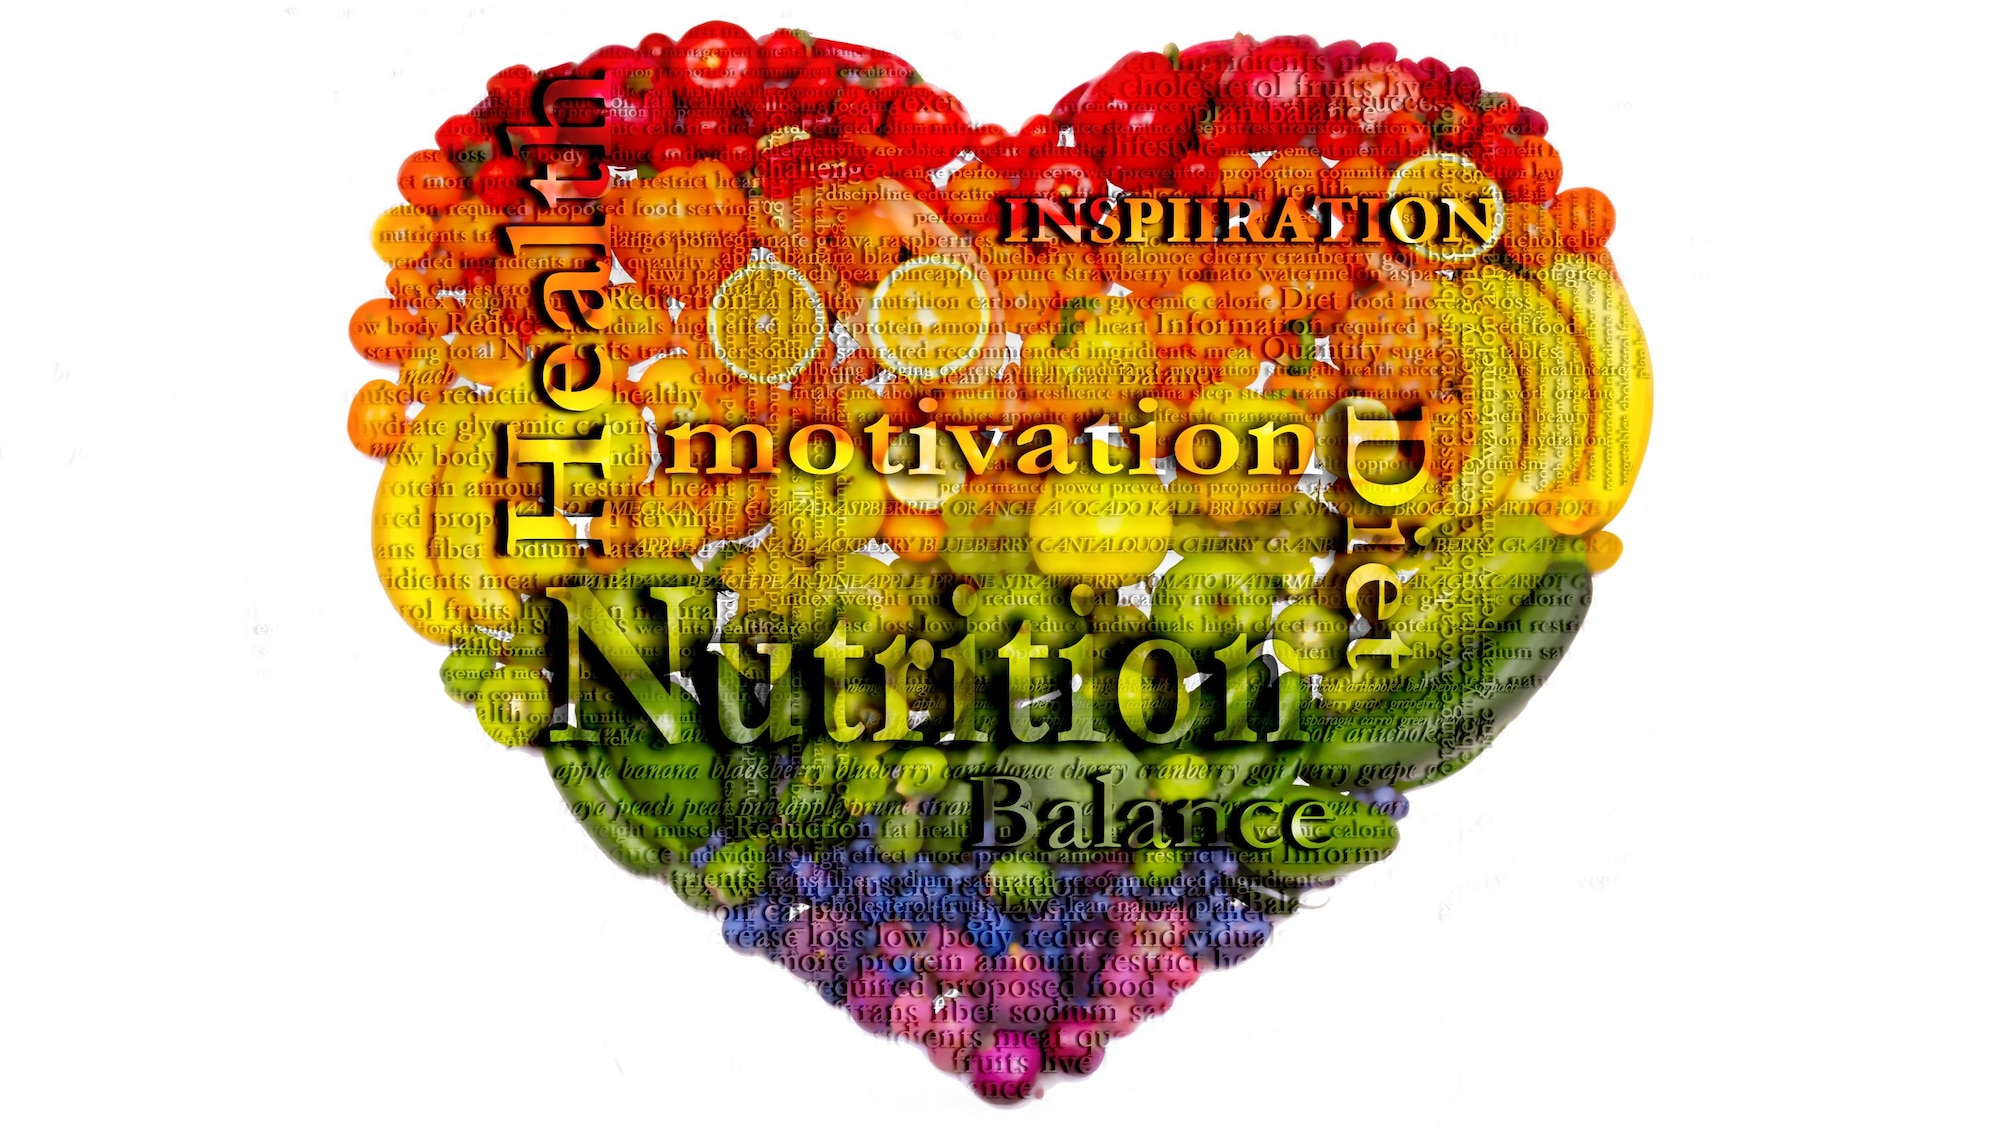 The month of March not only celebrates the beginning of spring but is also a month to remind the public about the importance of nutrition. The National Nutrition Month campaign – created by the Academy of Nutrition and Dietetics - educates people on making informed food choices and developing sound eating and physical activity habits. (U.S. Air Force graphic by Senior Airman Ariel D. Partlow)